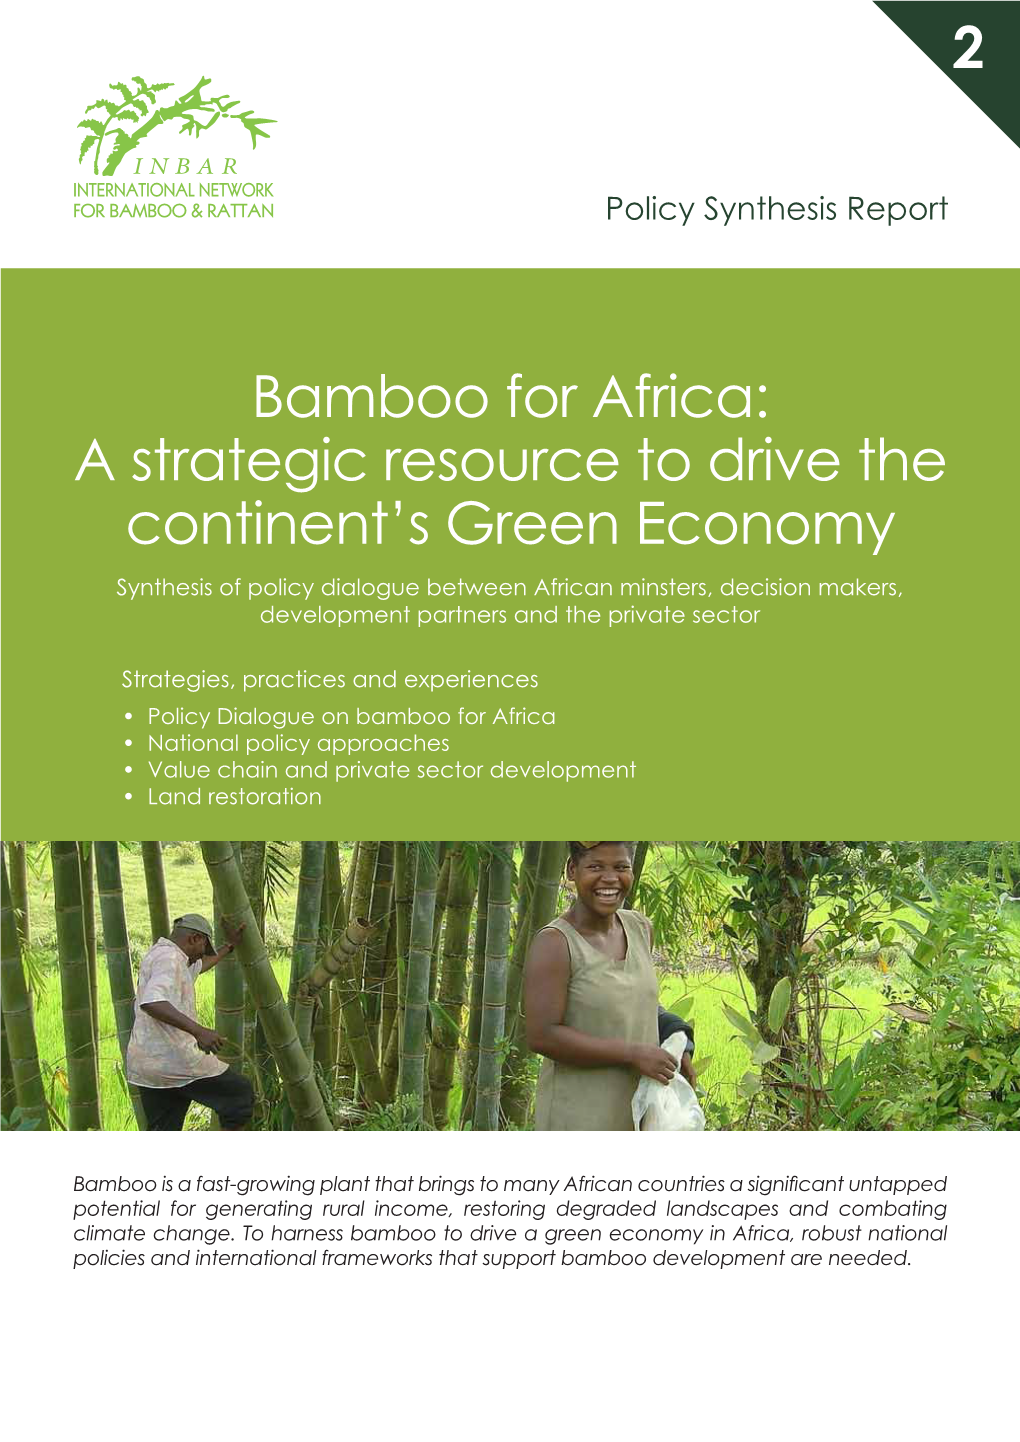 A Strategic Resource to Drive the Continent's Green Economy